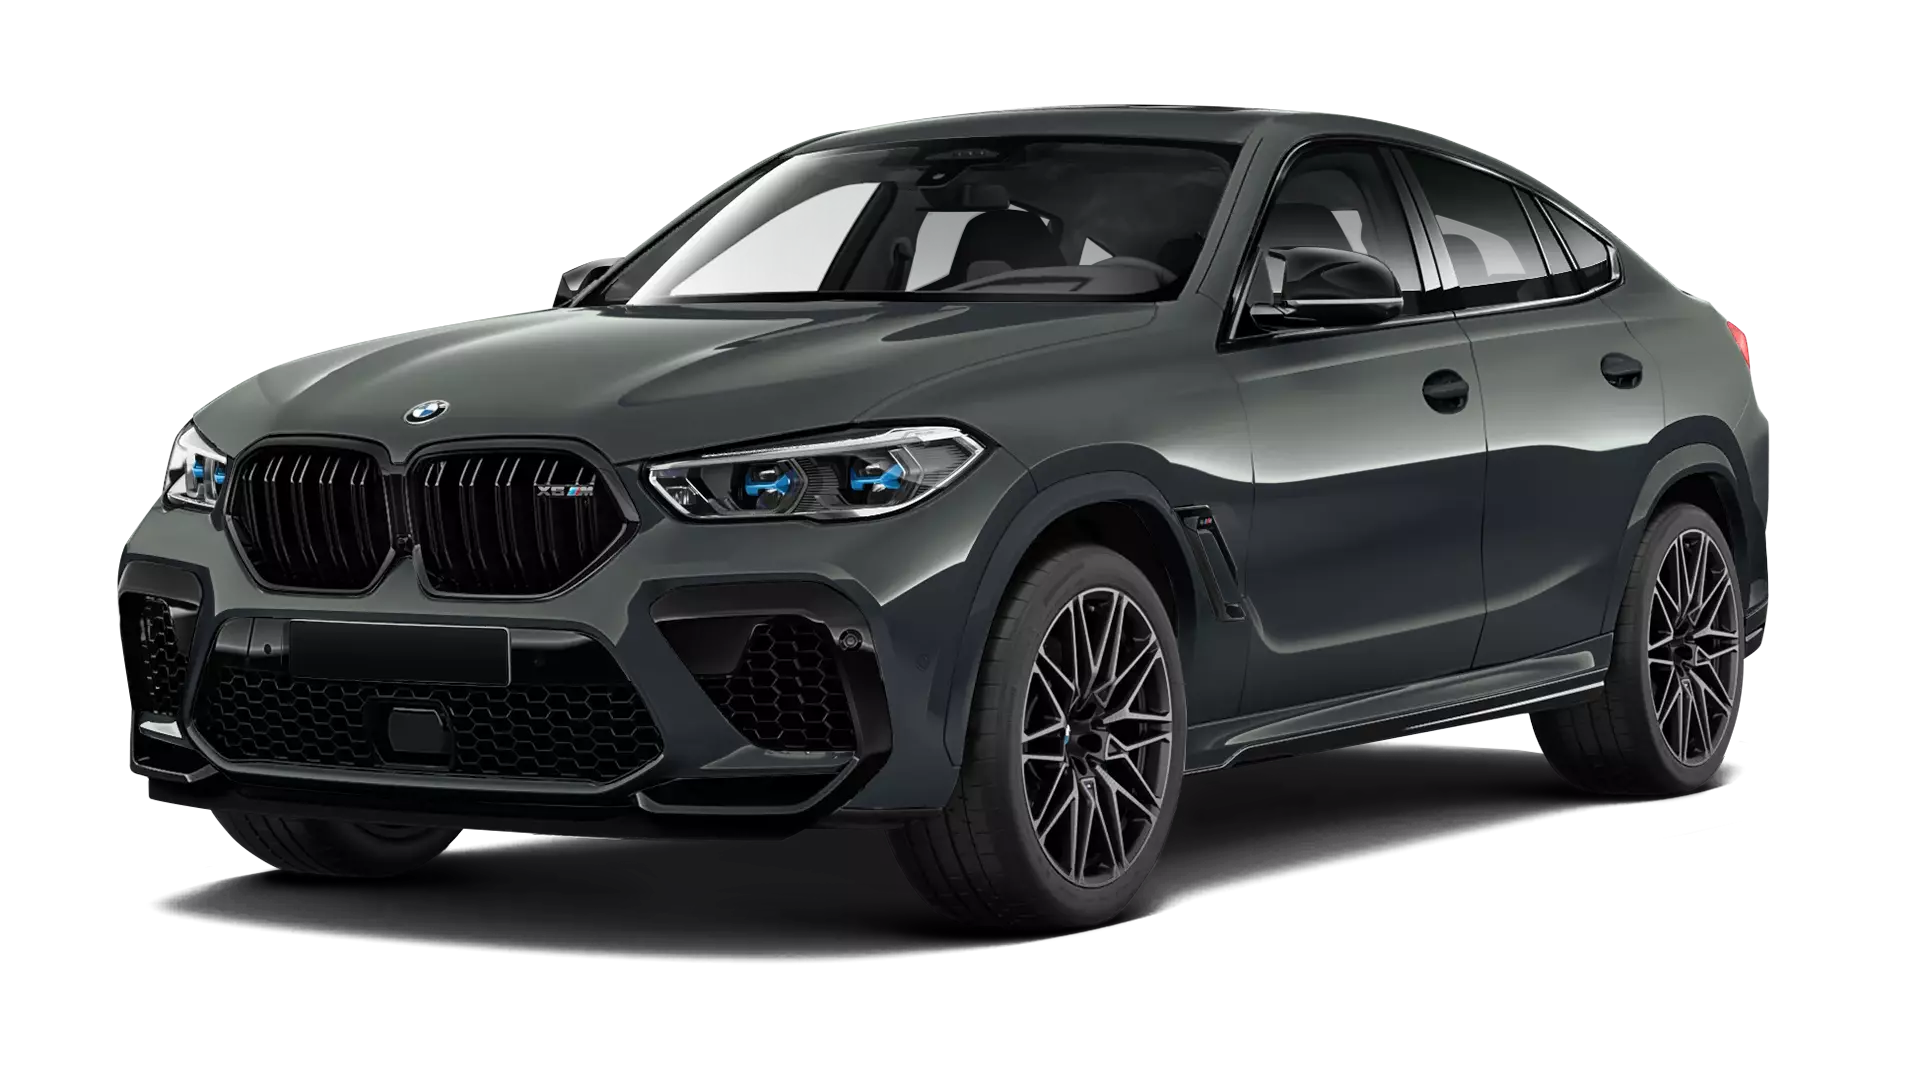 BMW X6M F96 stock front view in dravit grey